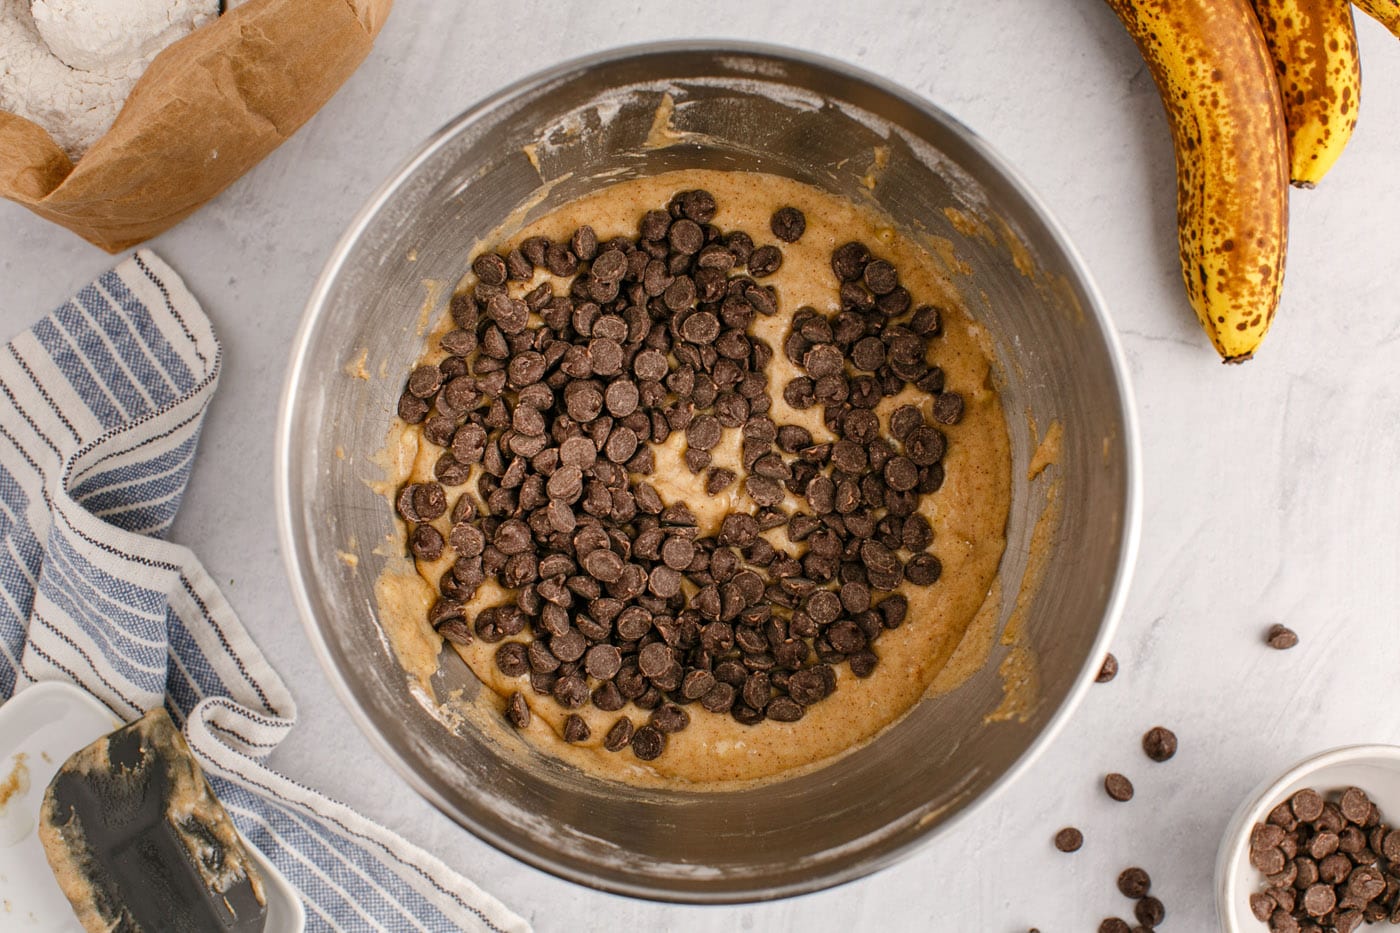 chocolate chips added to banana bread batter